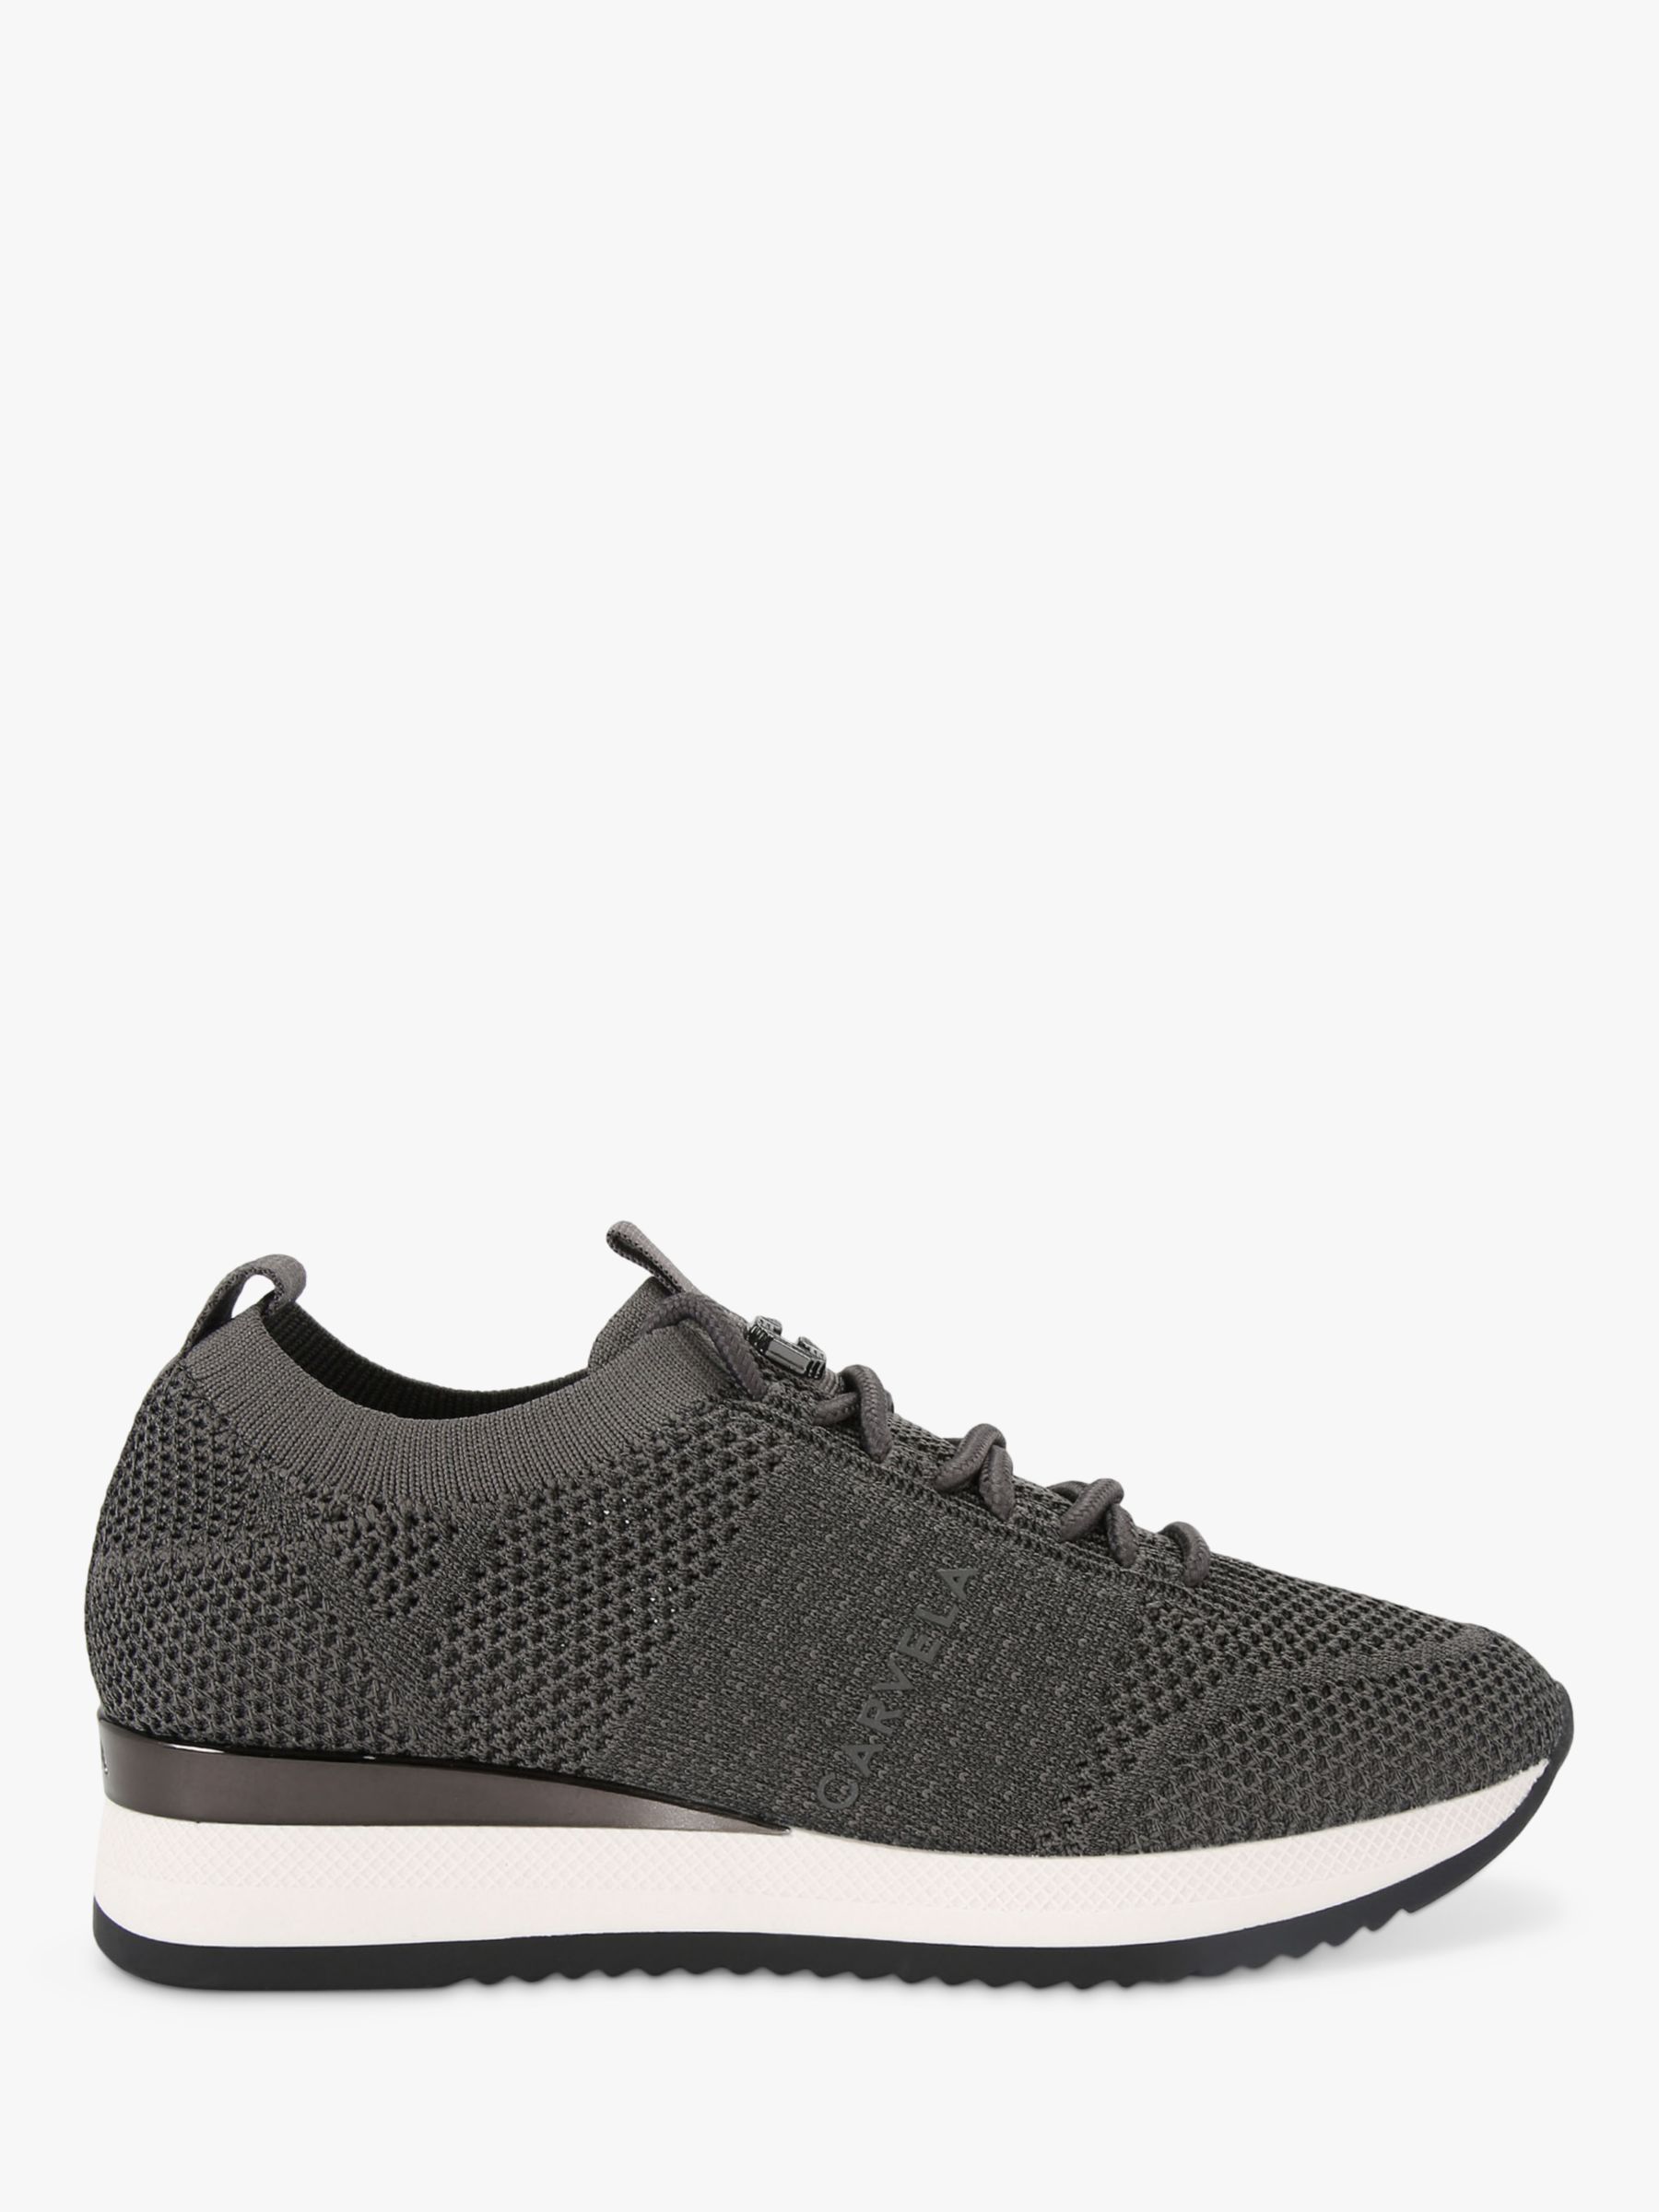 Carvela Frame Knit Trainers, Grey Mid at John Lewis & Partners